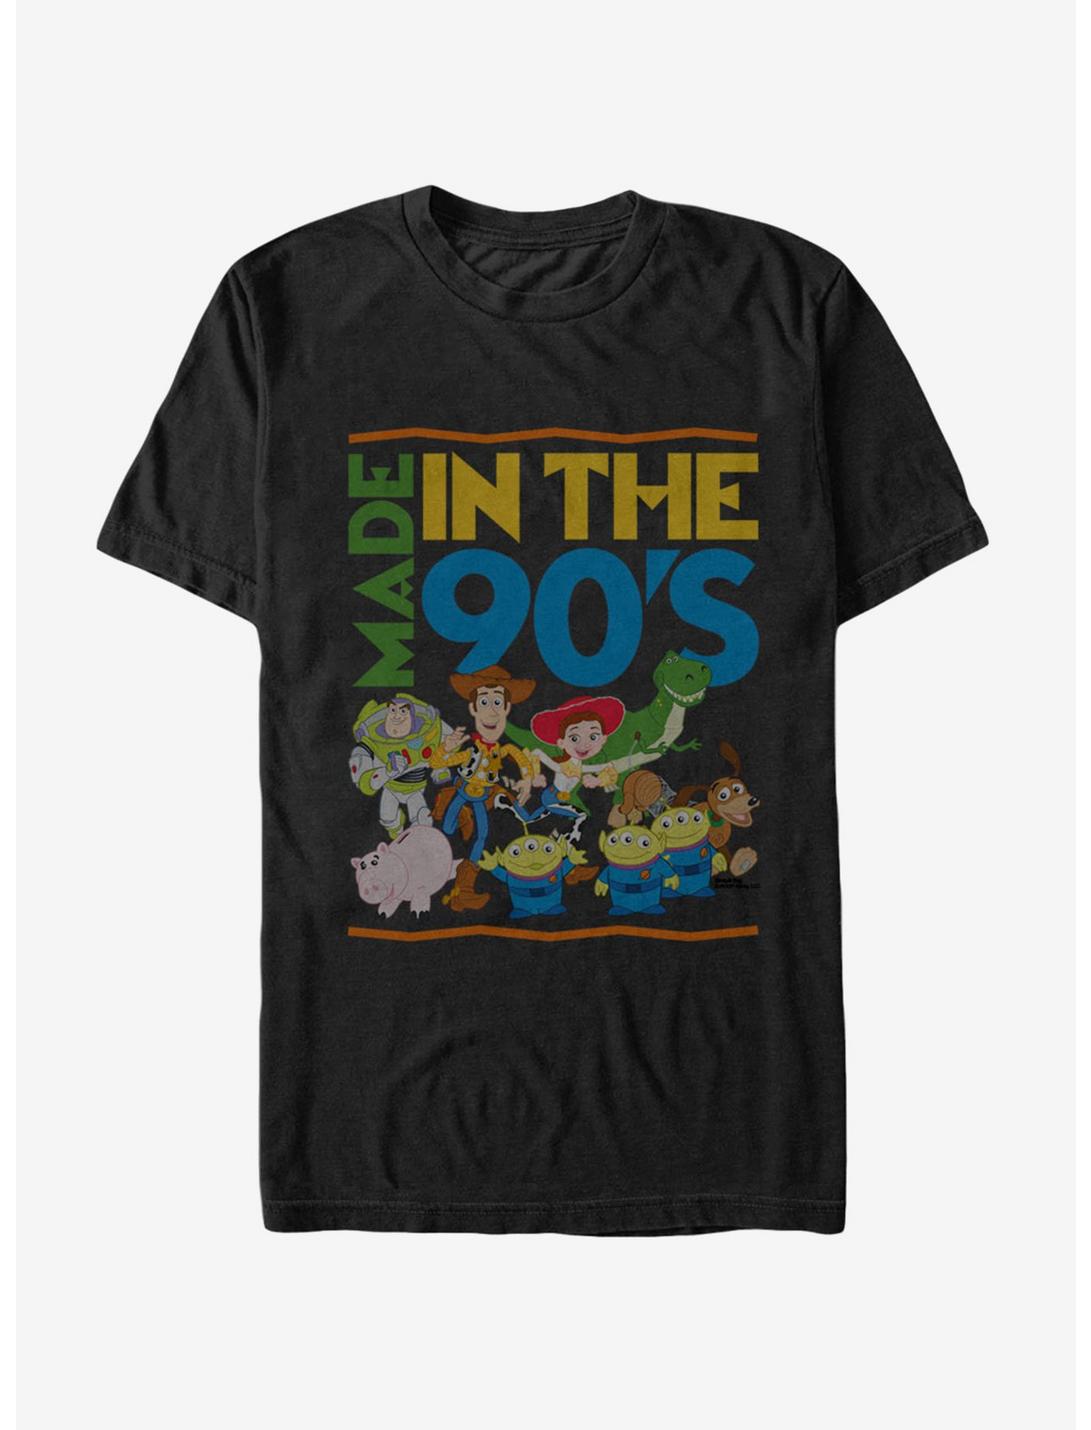 Disney Pixar Toy Story Made In The 90's T-Shirt, BLACK, hi-res